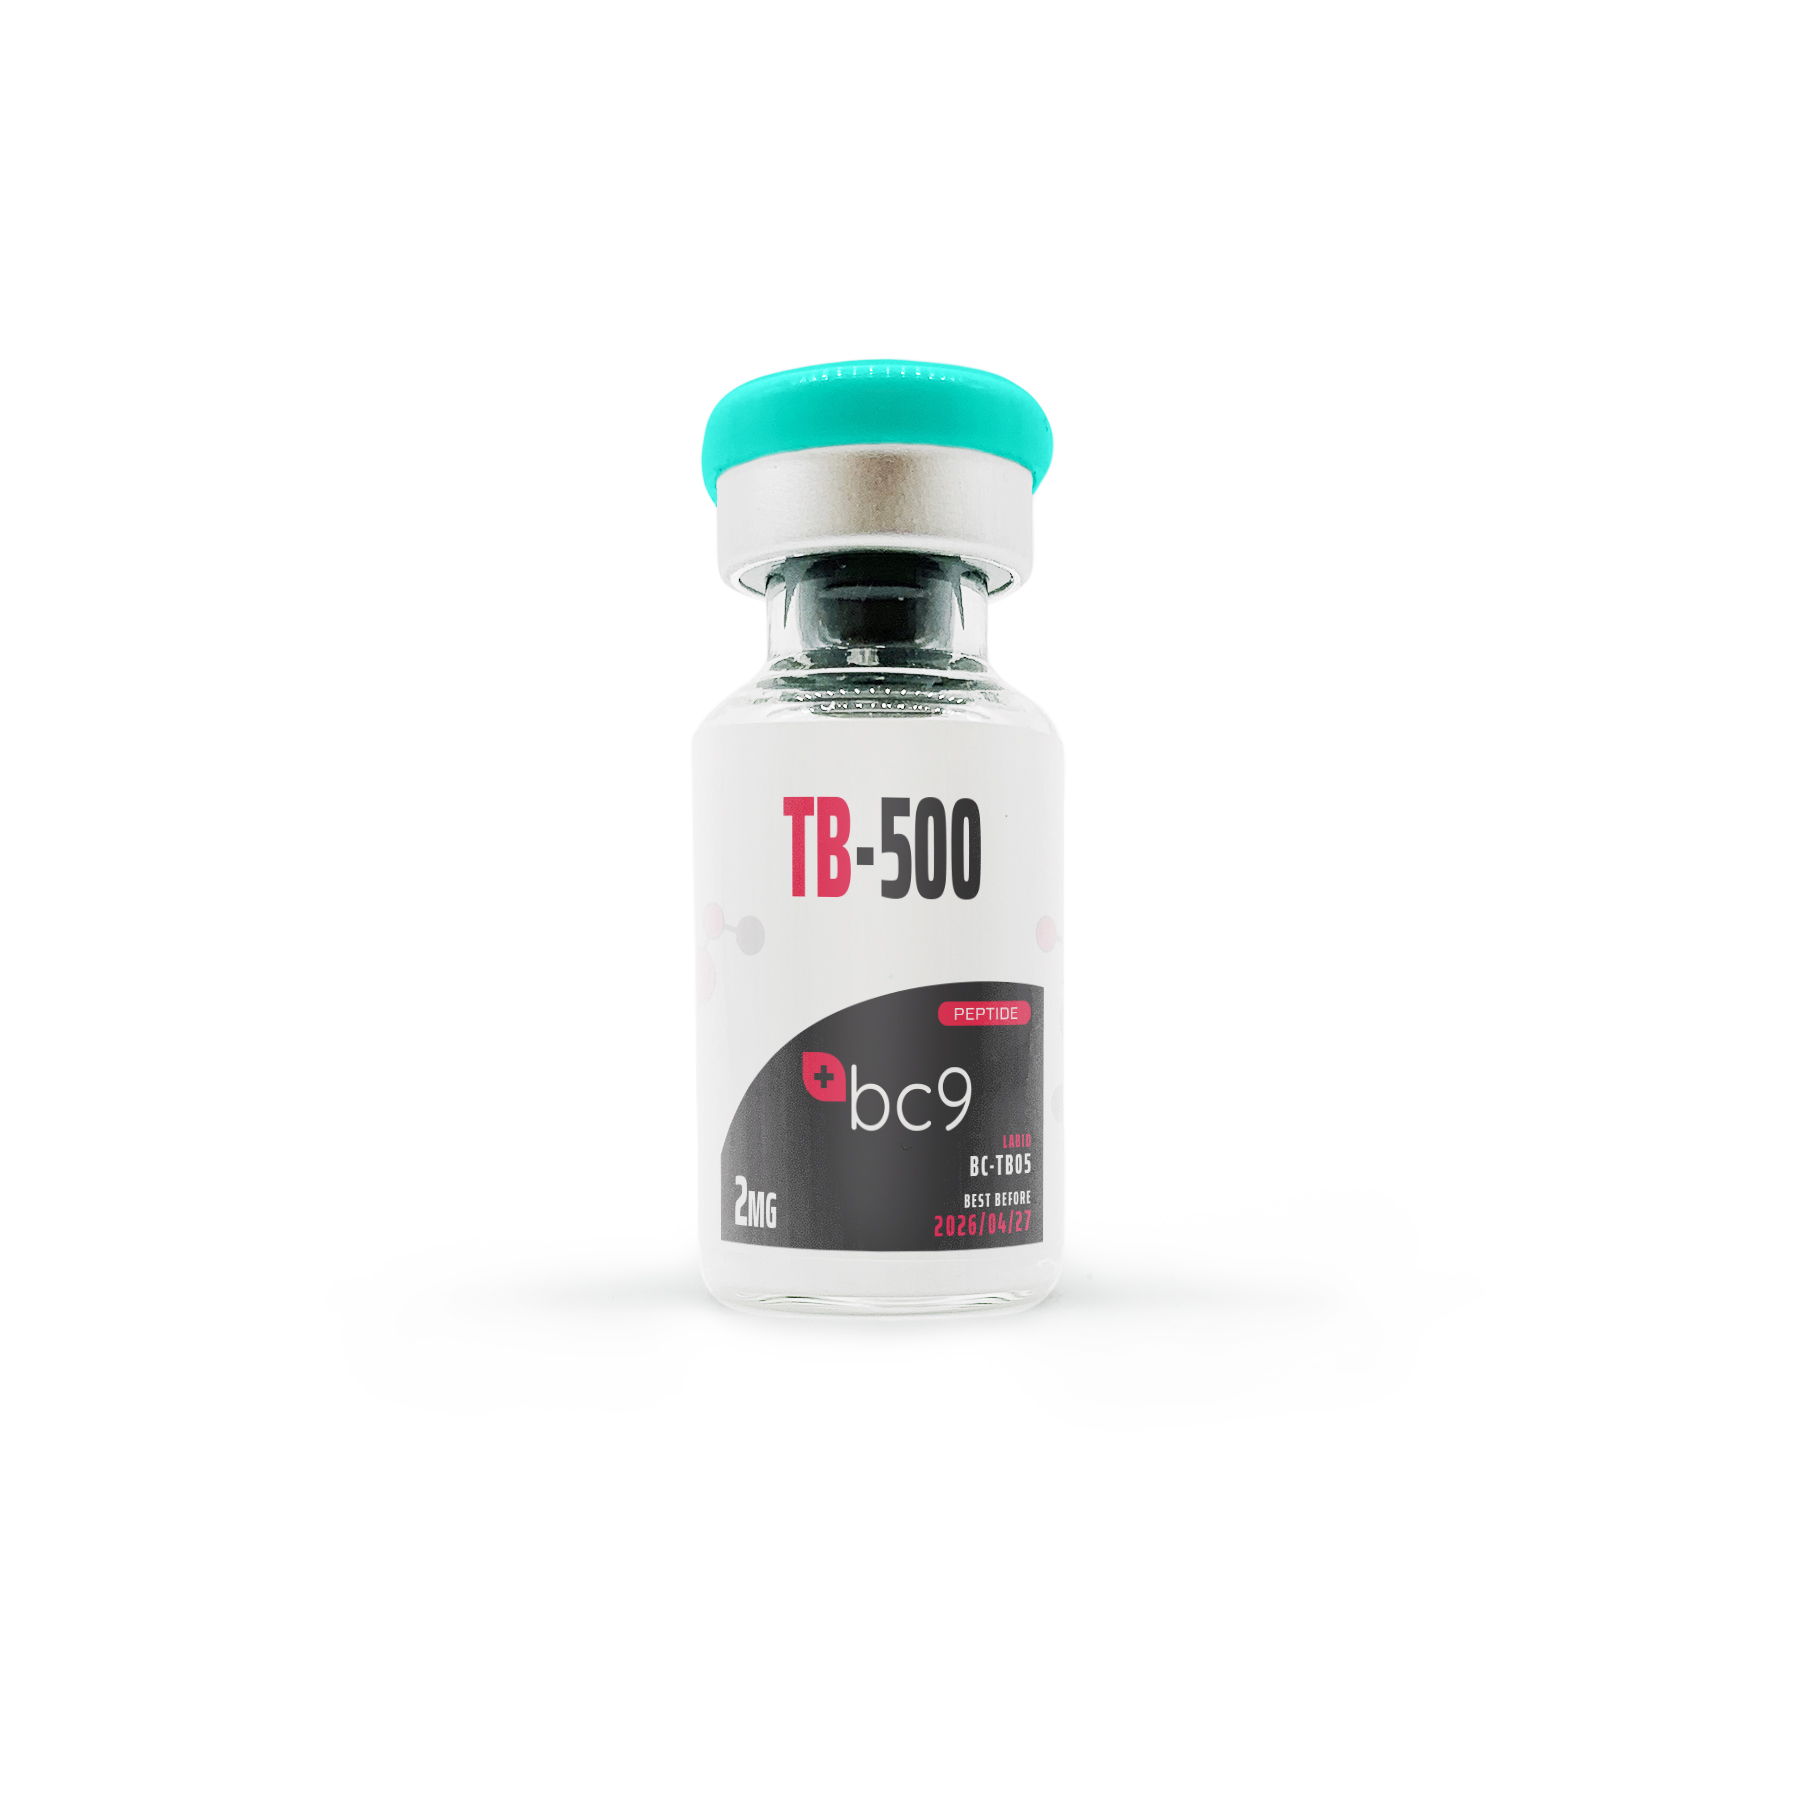 TB-500 Peptide For Sale | 3rd Party Tested | BC9.org